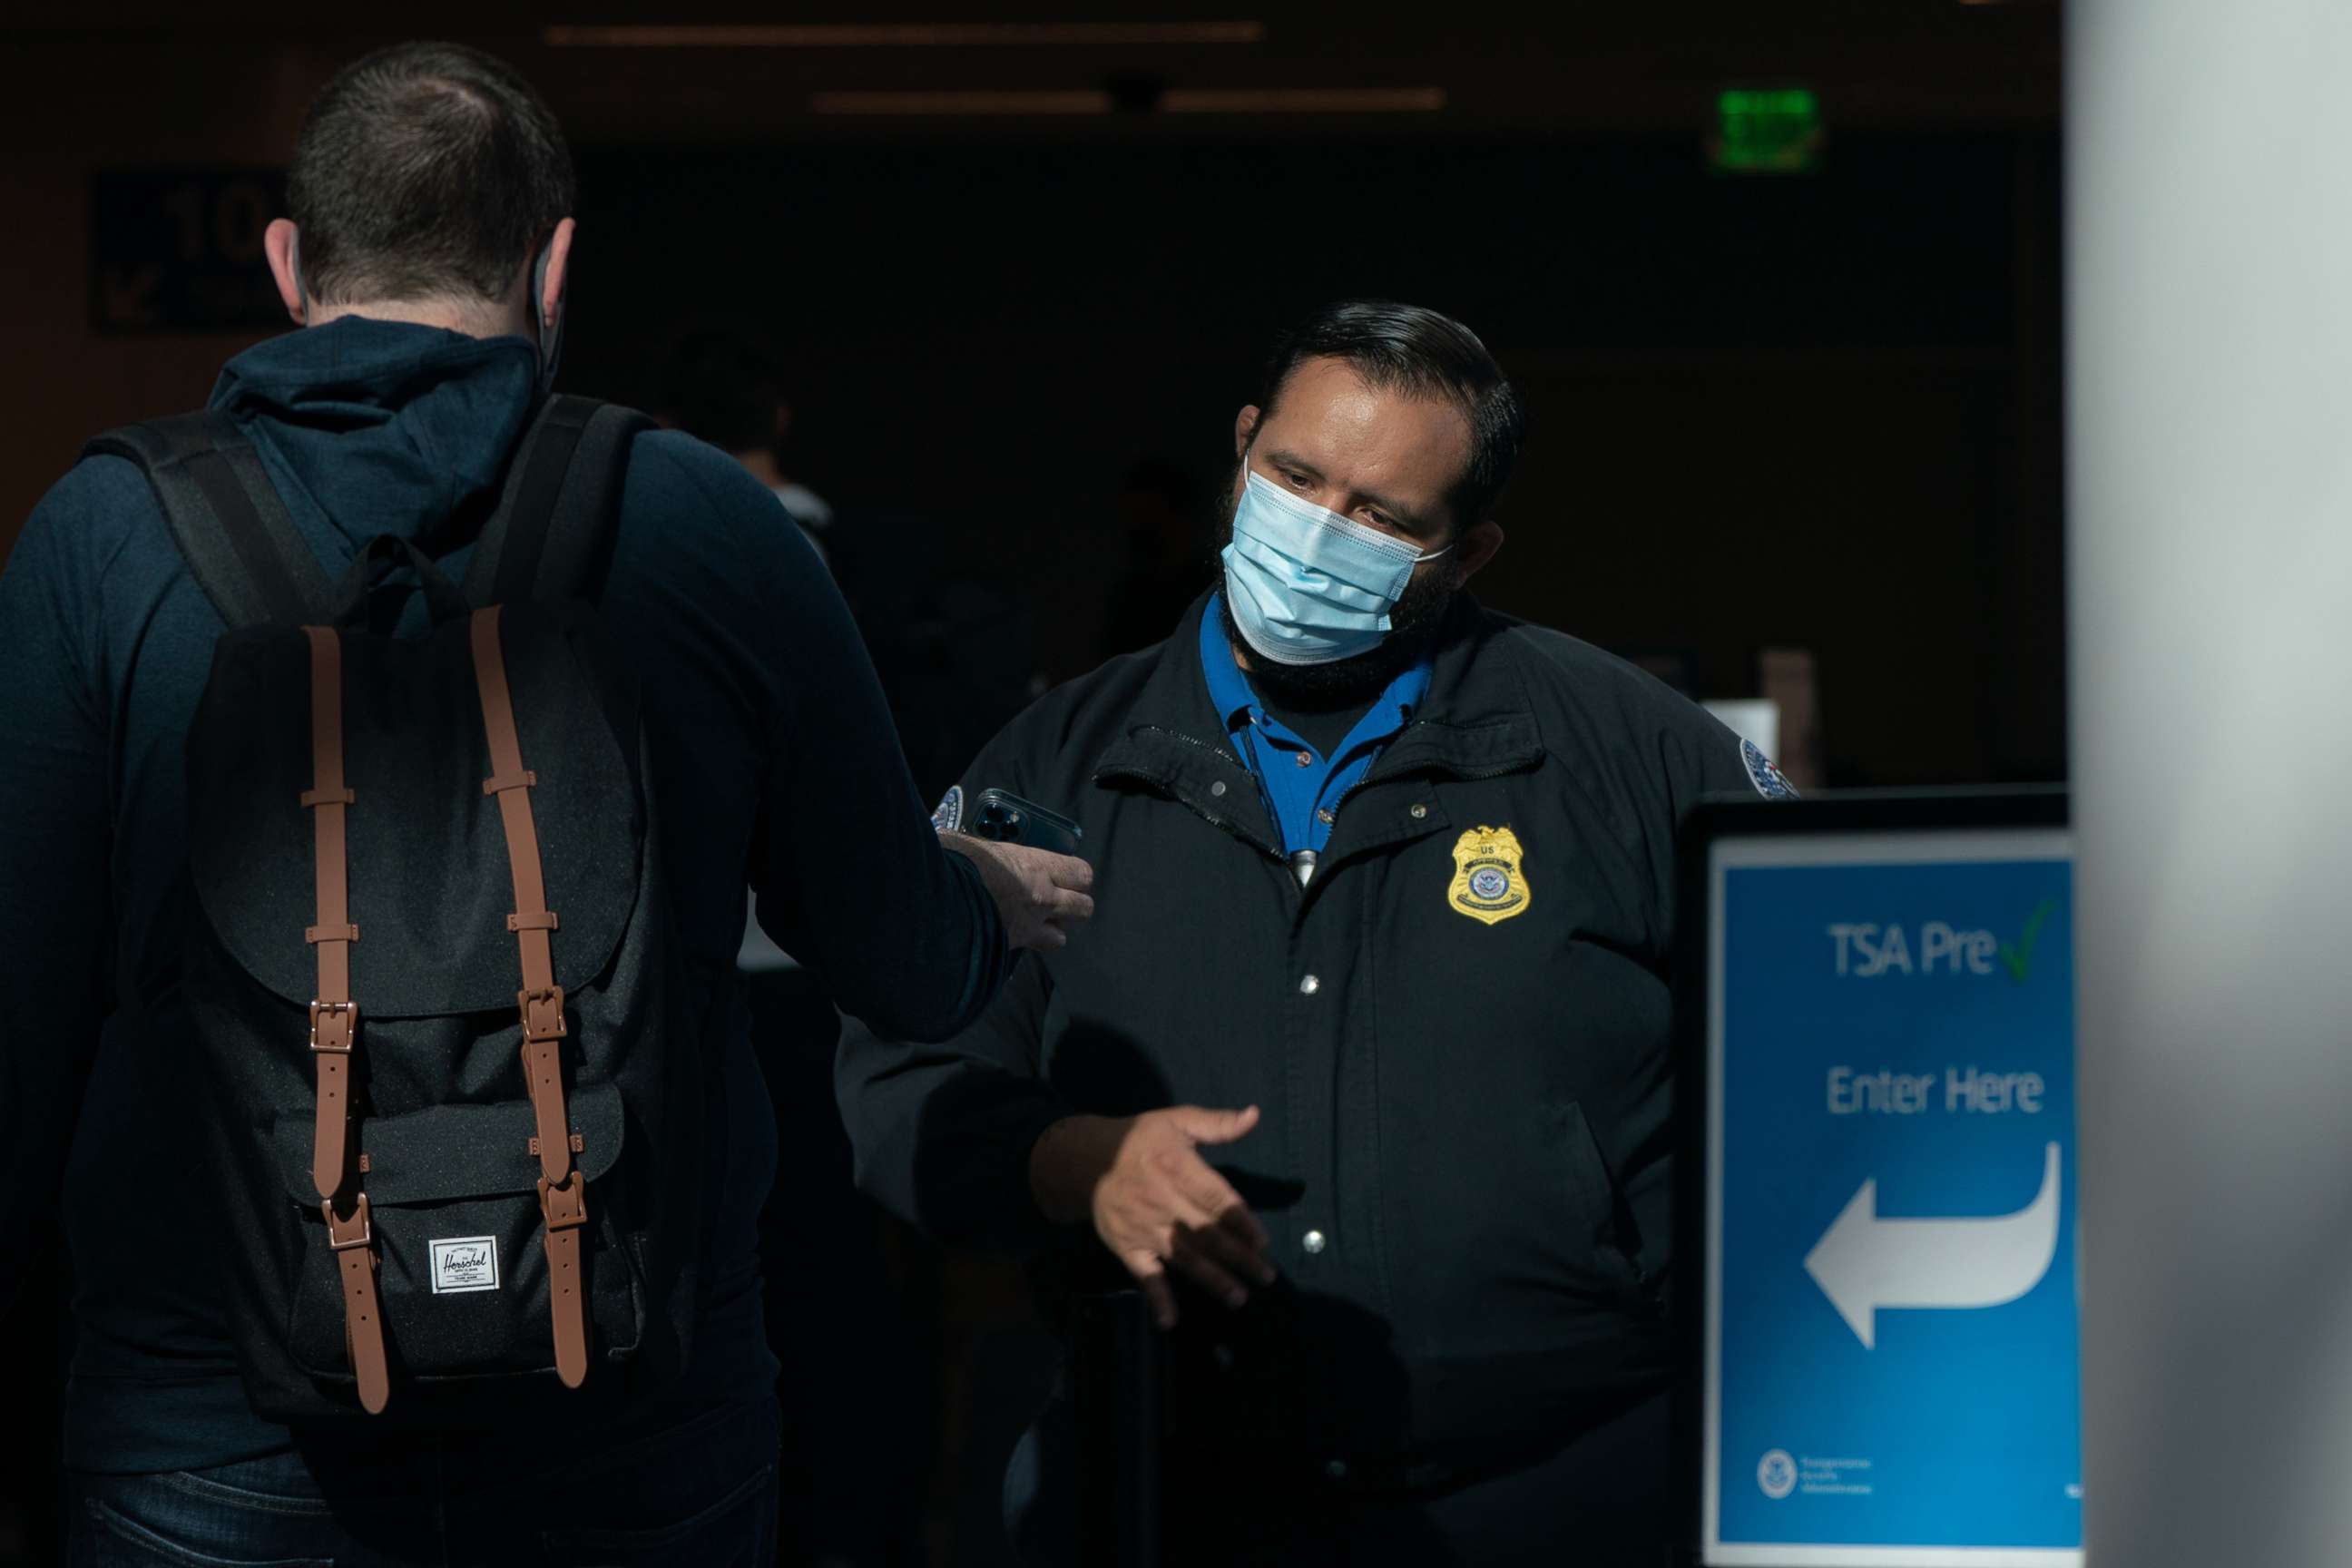 PHOTO: A Transportation Security Administration (TSA) agent wearing a protective mask checks a traveler's identification at Los Angeles International Airport, May 28, 2021.